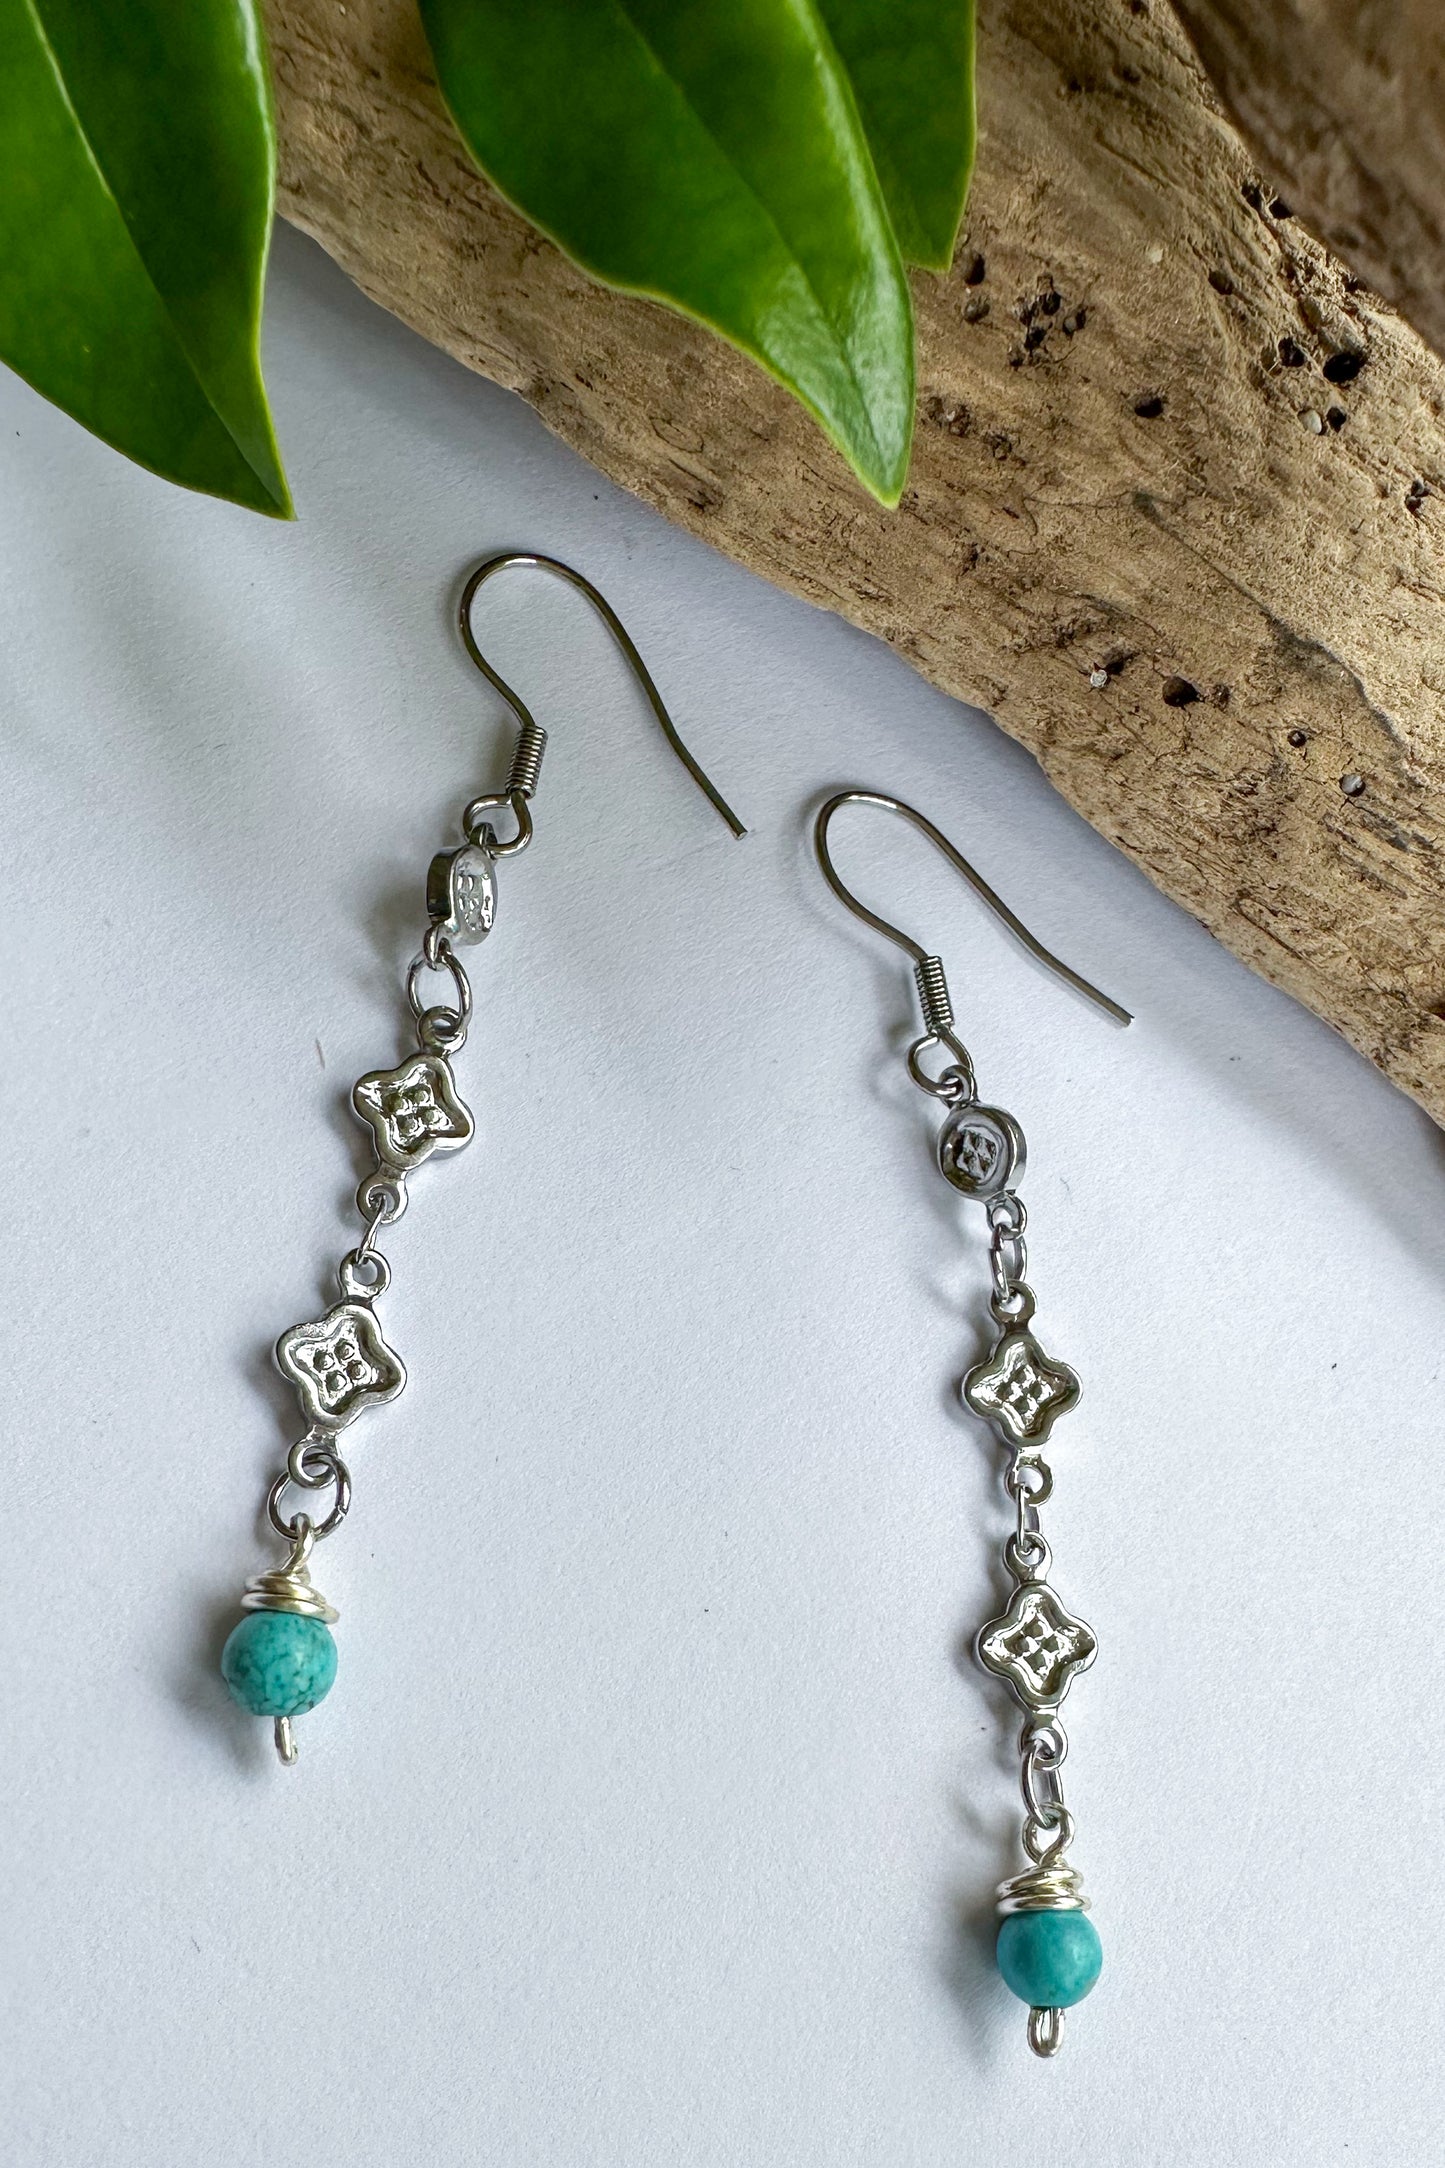 Three Drop Charm Earrings in Turquoise - SpiritedBoutiques Boho Hippie Boutique Style Earrings, Serenity Spirit Lala